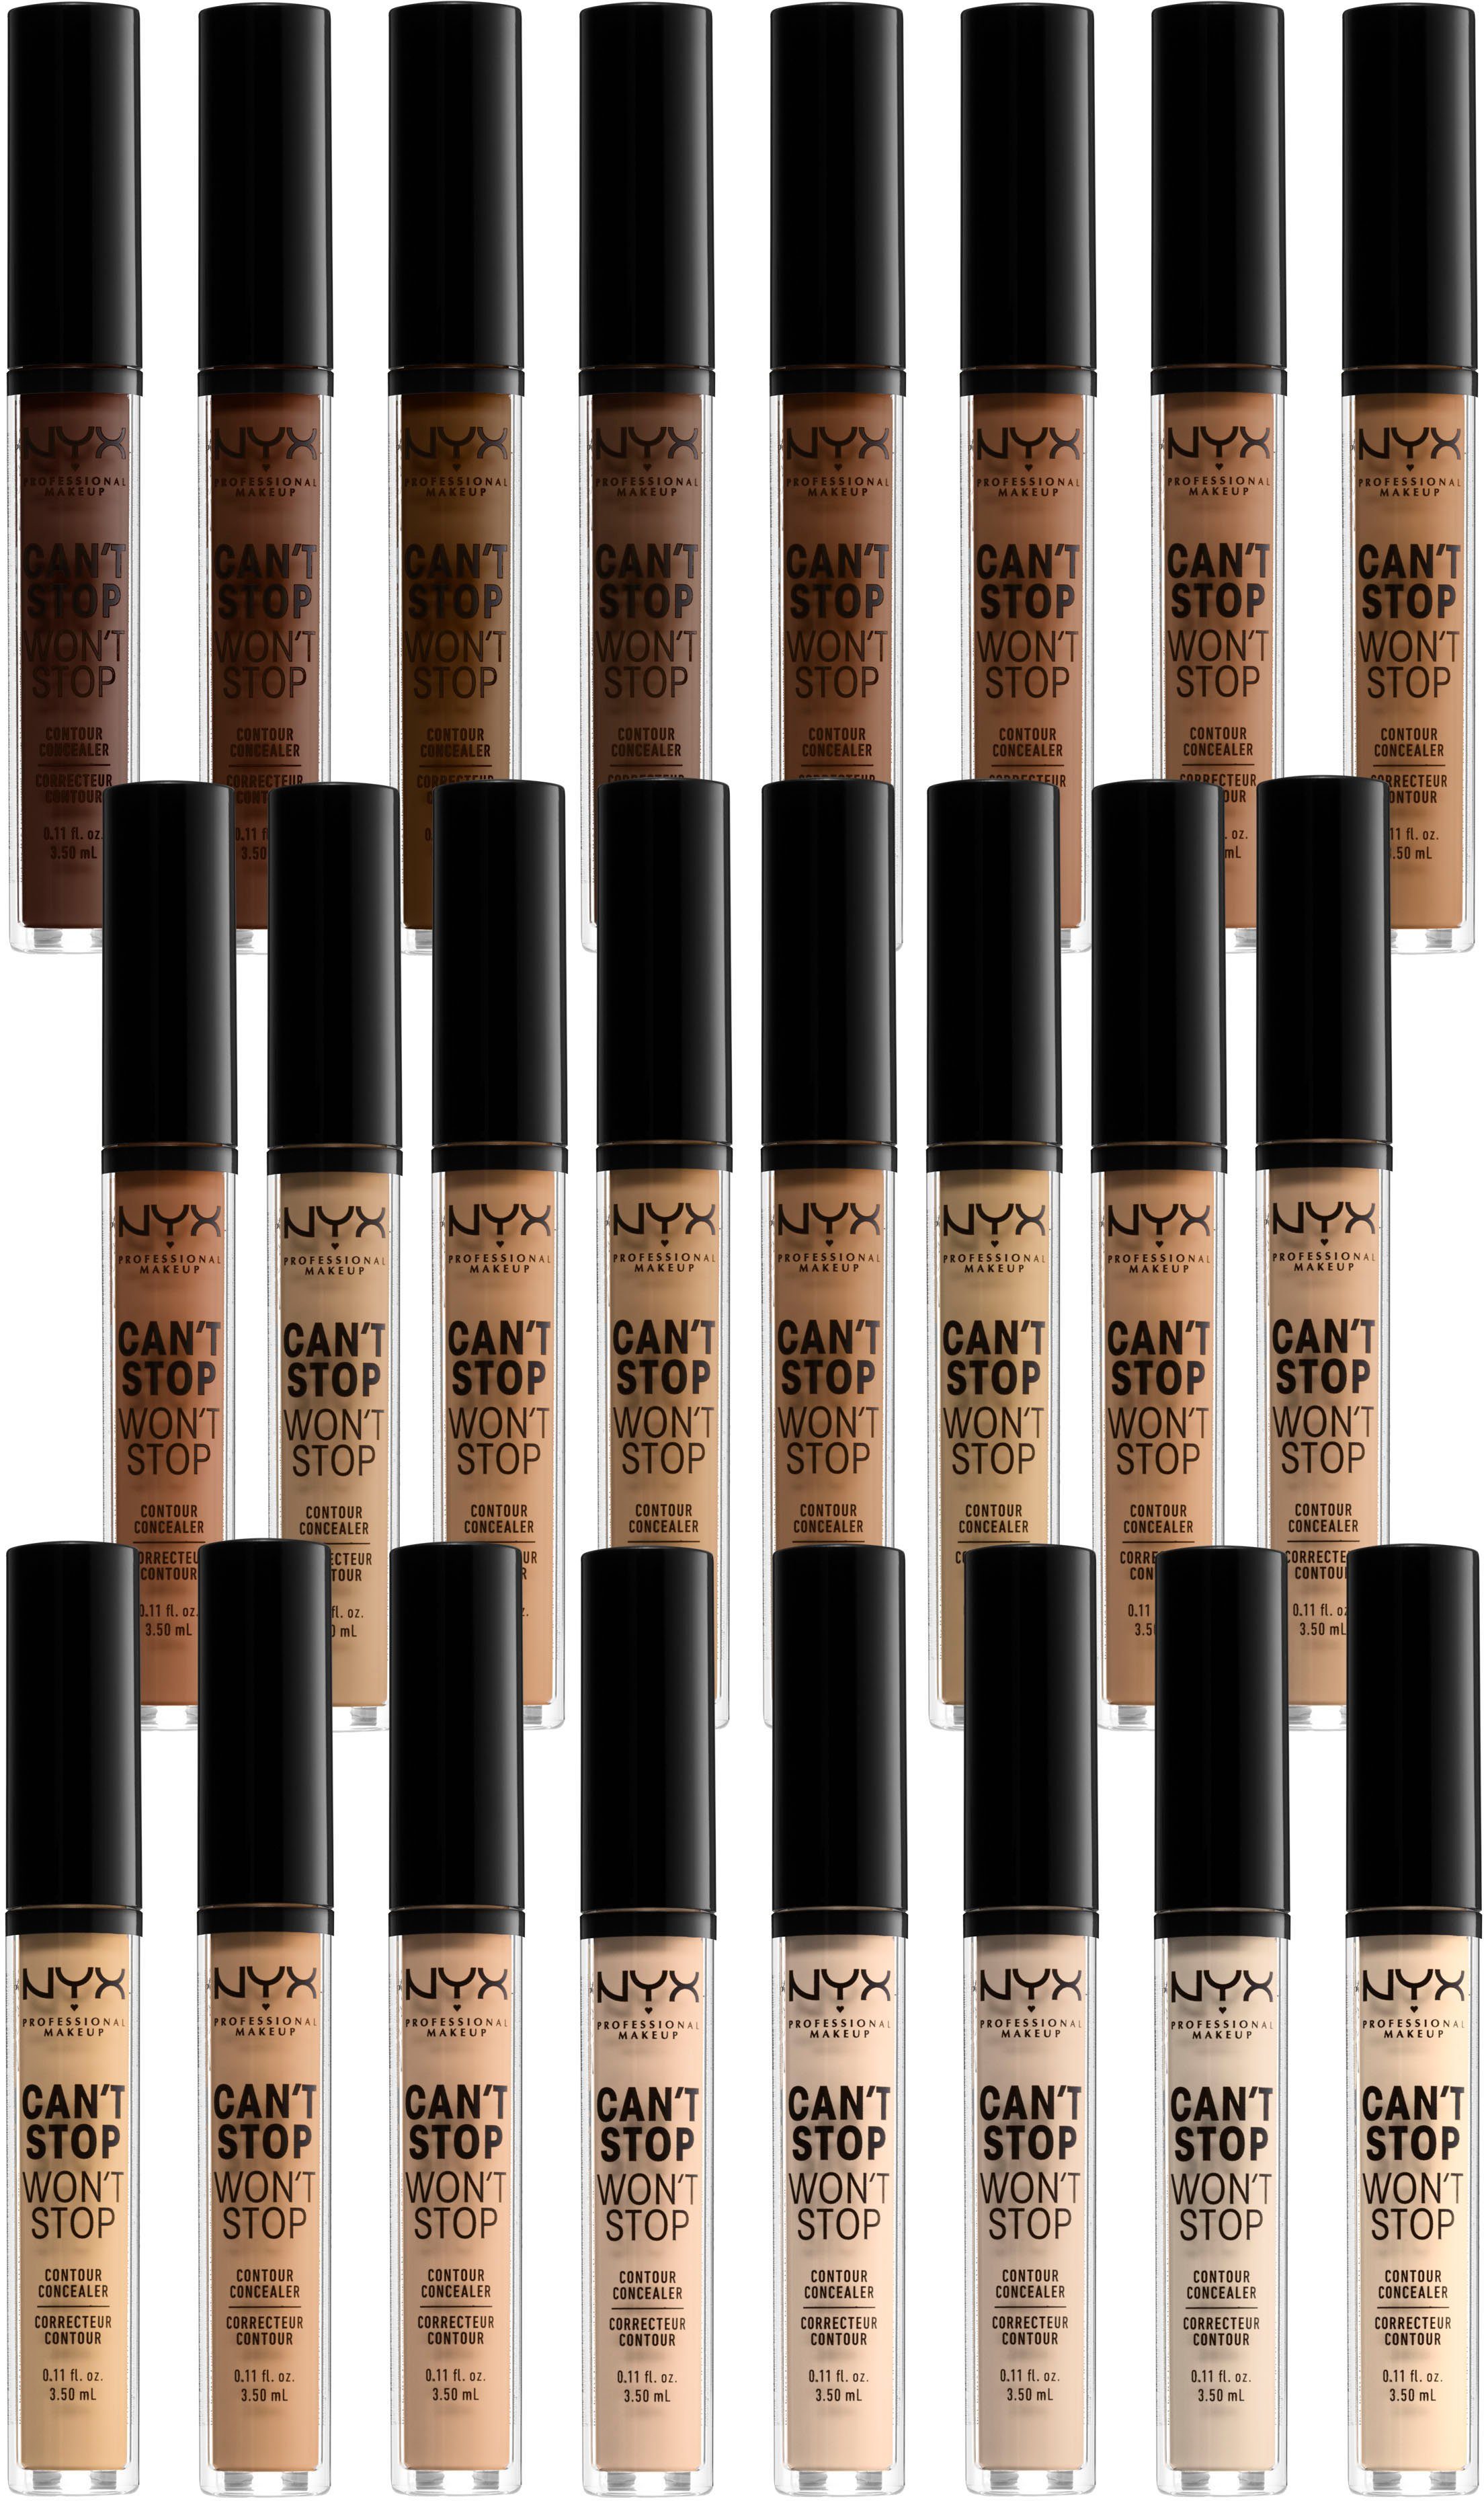 Stop NYX Makeup Won´t Stop Concealer Vanilla Concealer Can´t CSWSC06 NYX Professional